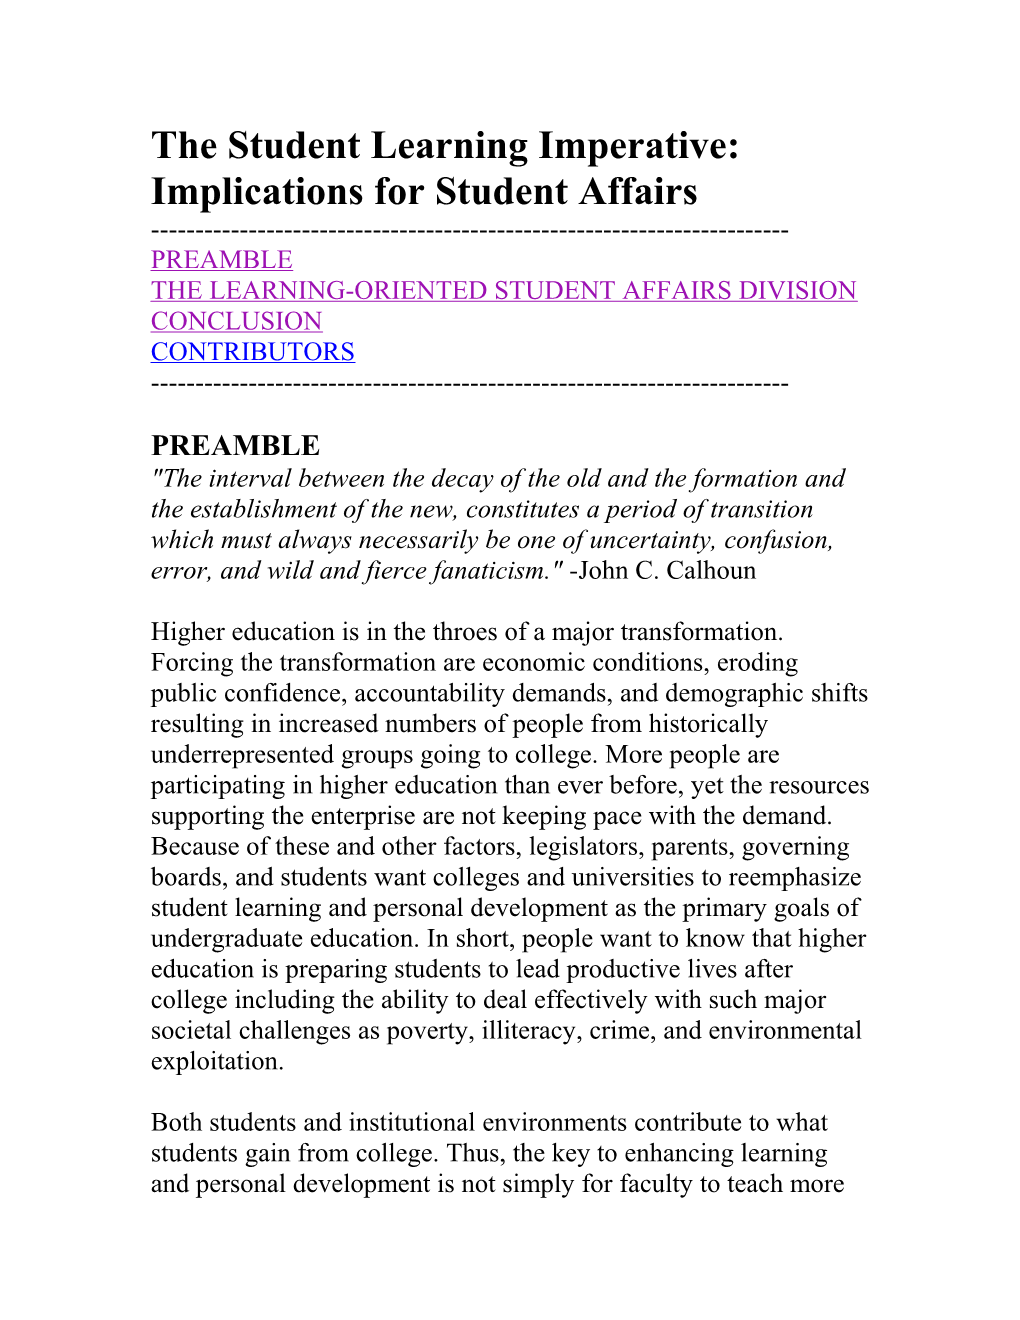 The Student Learning Imperative: Implications for Student Affairs